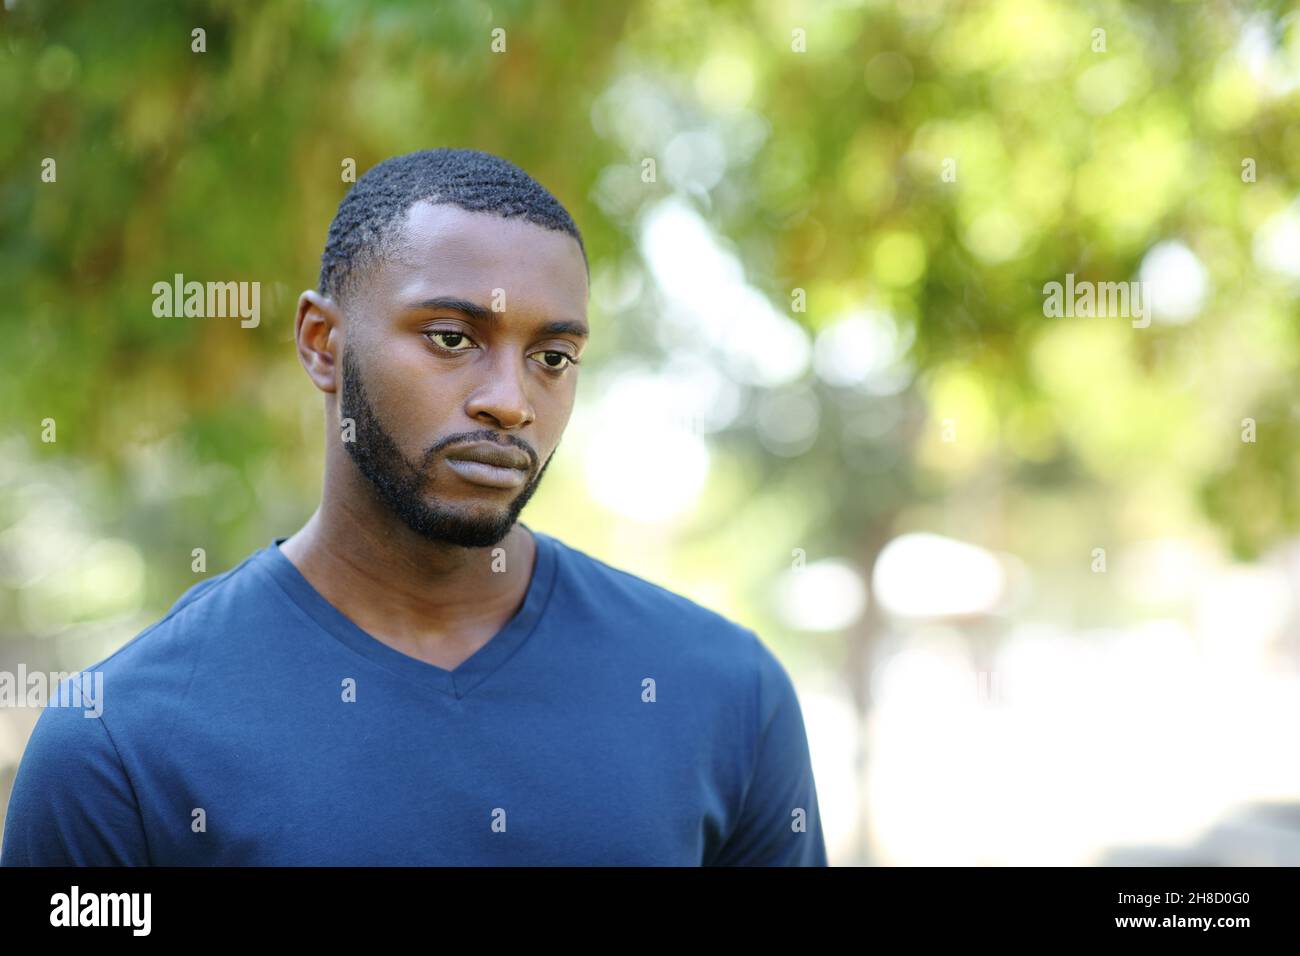 Worried man with black skin distracted looking away walking in a park Stock Photo